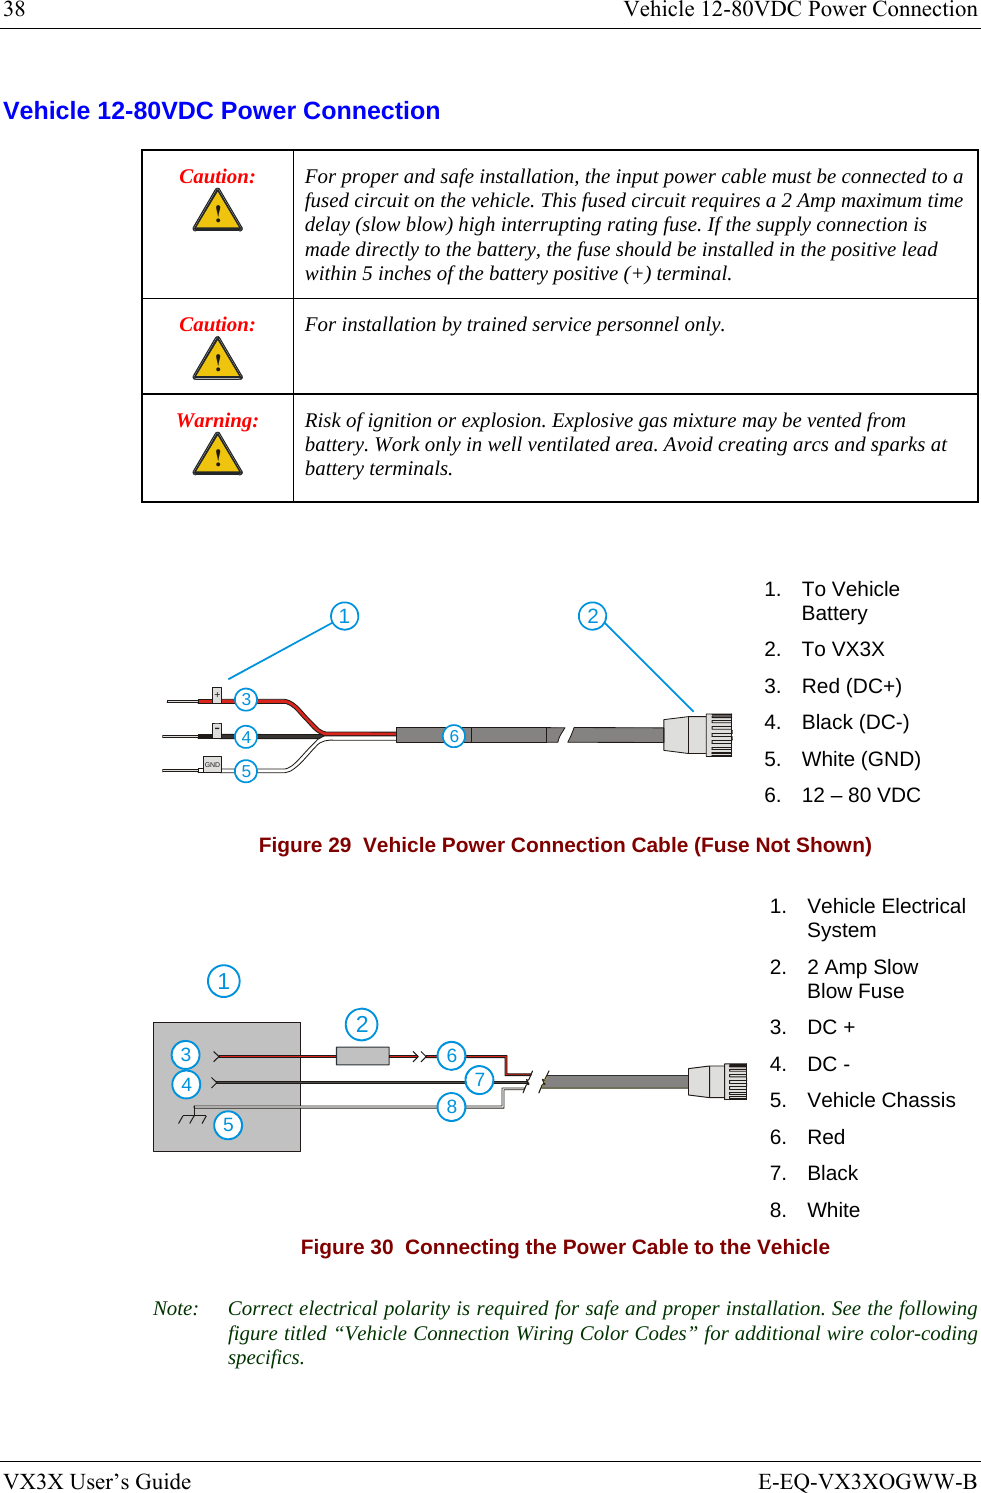 38  Vehicle 12-80VDC Power Connection VX3X User’s Guide  E-EQ-VX3XOGWW-B Vehicle 12-80VDC Power Connection Caution: ! For proper and safe installation, the input power cable must be connected to a fused circuit on the vehicle. This fused circuit requires a 2 Amp maximum time delay (slow blow) high interrupting rating fuse. If the supply connection is made directly to the battery, the fuse should be installed in the positive lead within 5 inches of the battery positive (+) terminal. Caution: ! For installation by trained service personnel only. Warning: ! Risk of ignition or explosion. Explosive gas mixture may be vented from battery. Work only in well ventilated area. Avoid creating arcs and sparks at battery terminals.  GND+-34561 2 1. To Vehicle Battery 2. To VX3X 3. Red (DC+) 4. Black (DC-) 5. White (GND) 6.  12 – 80 VDC Figure 29  Vehicle Power Connection Cable (Fuse Not Shown) 54321678 1.   Vehicle Electrical System 2.   2 Amp Slow Blow Fuse 3.   DC + 4.   DC - 5.   Vehicle Chassis 6.   Red 7.   Black 8.   White Figure 30  Connecting the Power Cable to the Vehicle Note:  Correct electrical polarity is required for safe and proper installation. See the following figure titled “Vehicle Connection Wiring Color Codes” for additional wire color-coding specifics. 